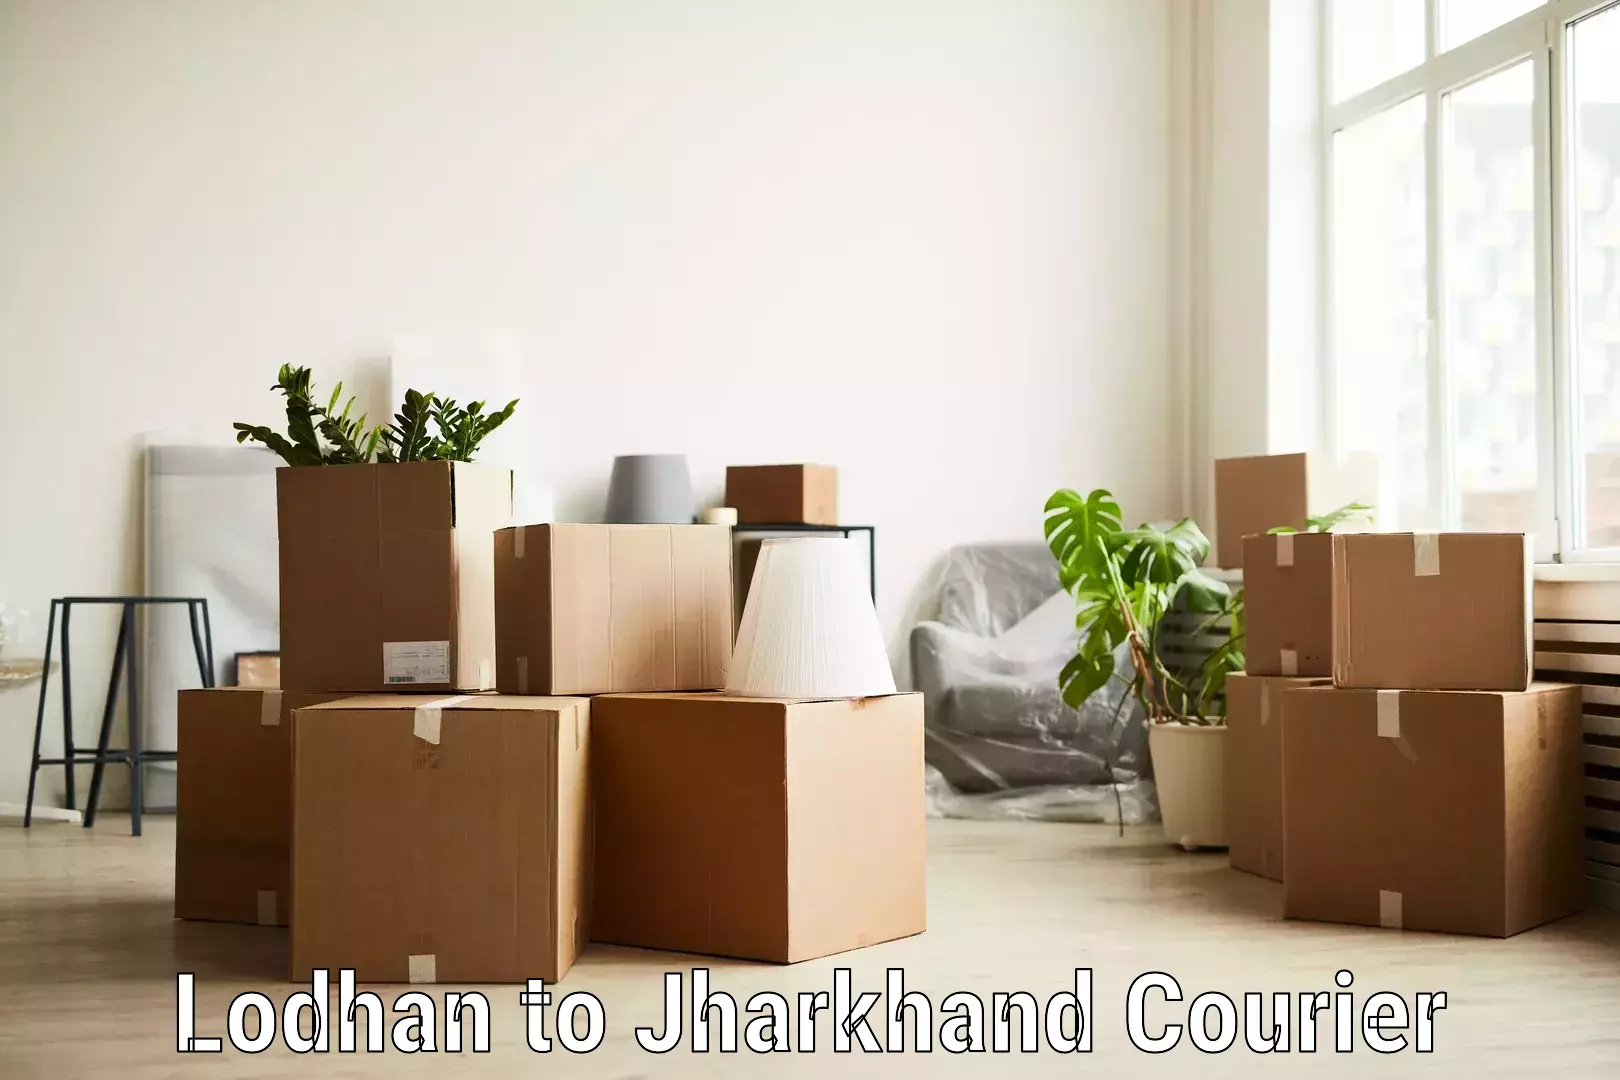 Ocean freight courier Lodhan to Jharkhand